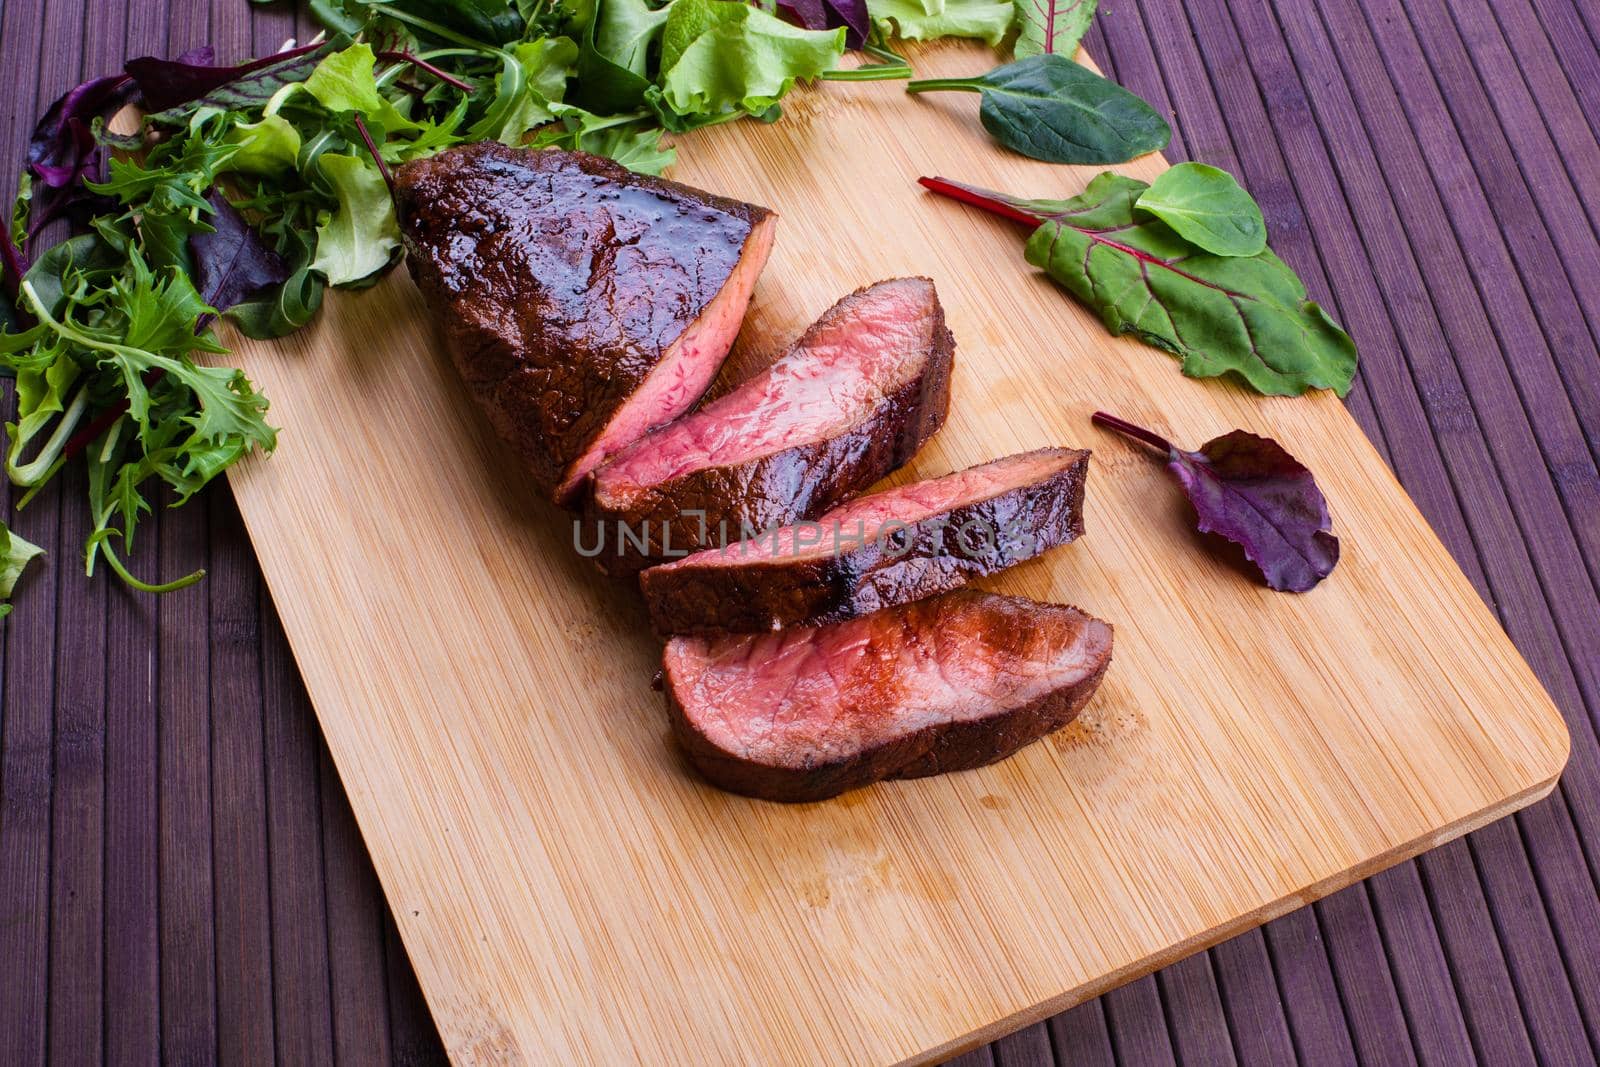 Beef grilled with blood on the kitchen blackboard. Stock image.